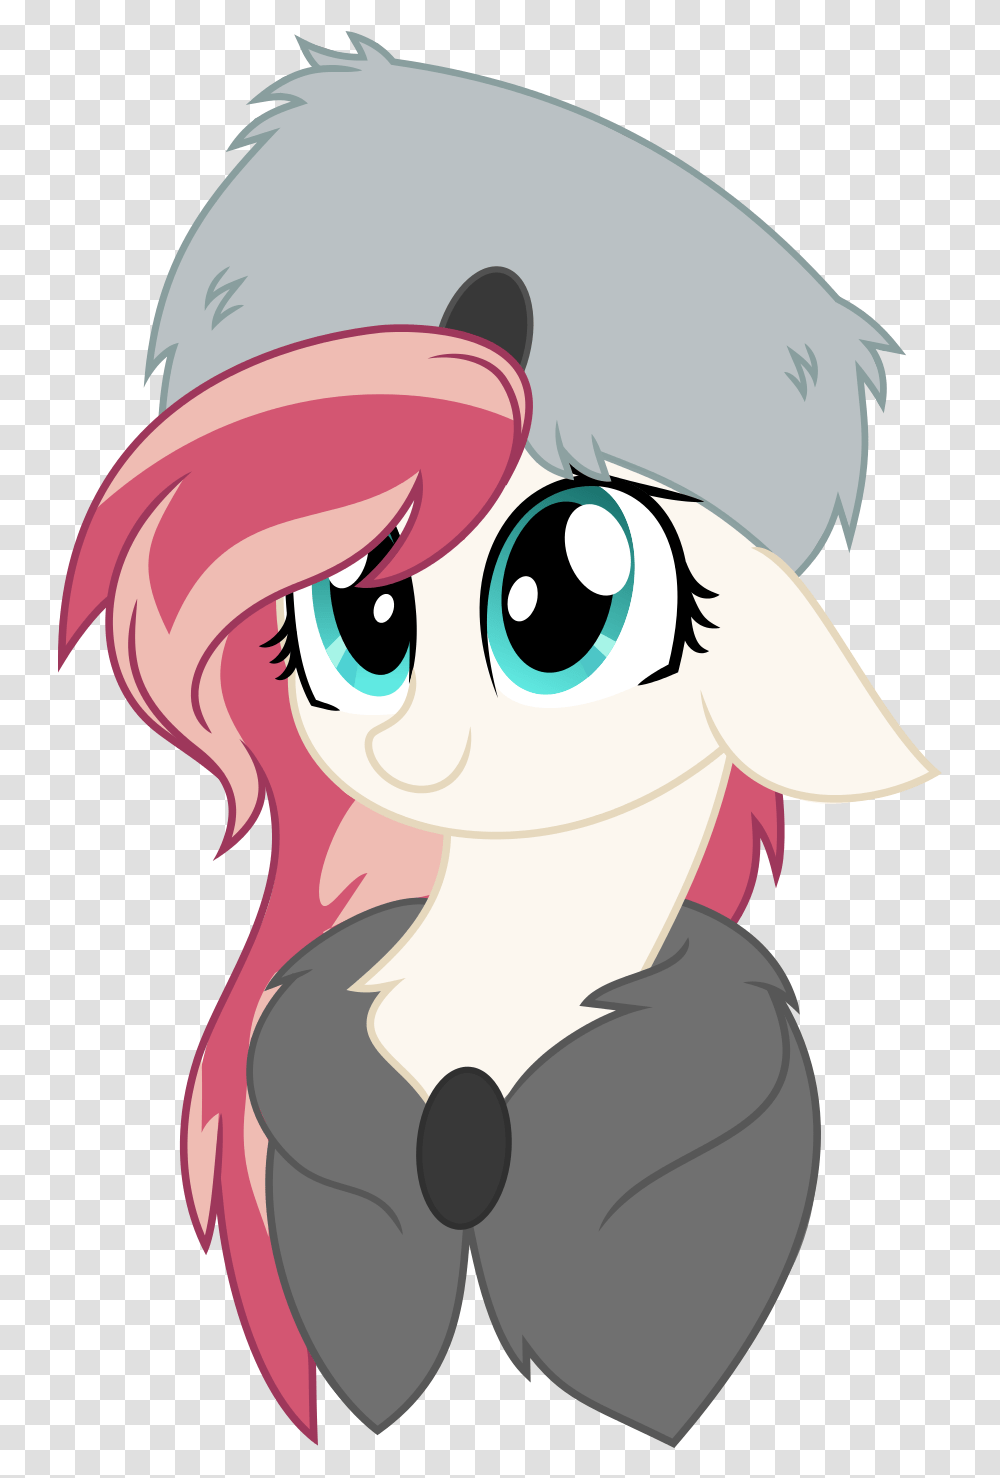 Download Hd Clip Black And White Artist Aureai Hat Oc Only Anime Girl Wearing Ushanka, Helmet, Clothing, Apparel, Graphics Transparent Png